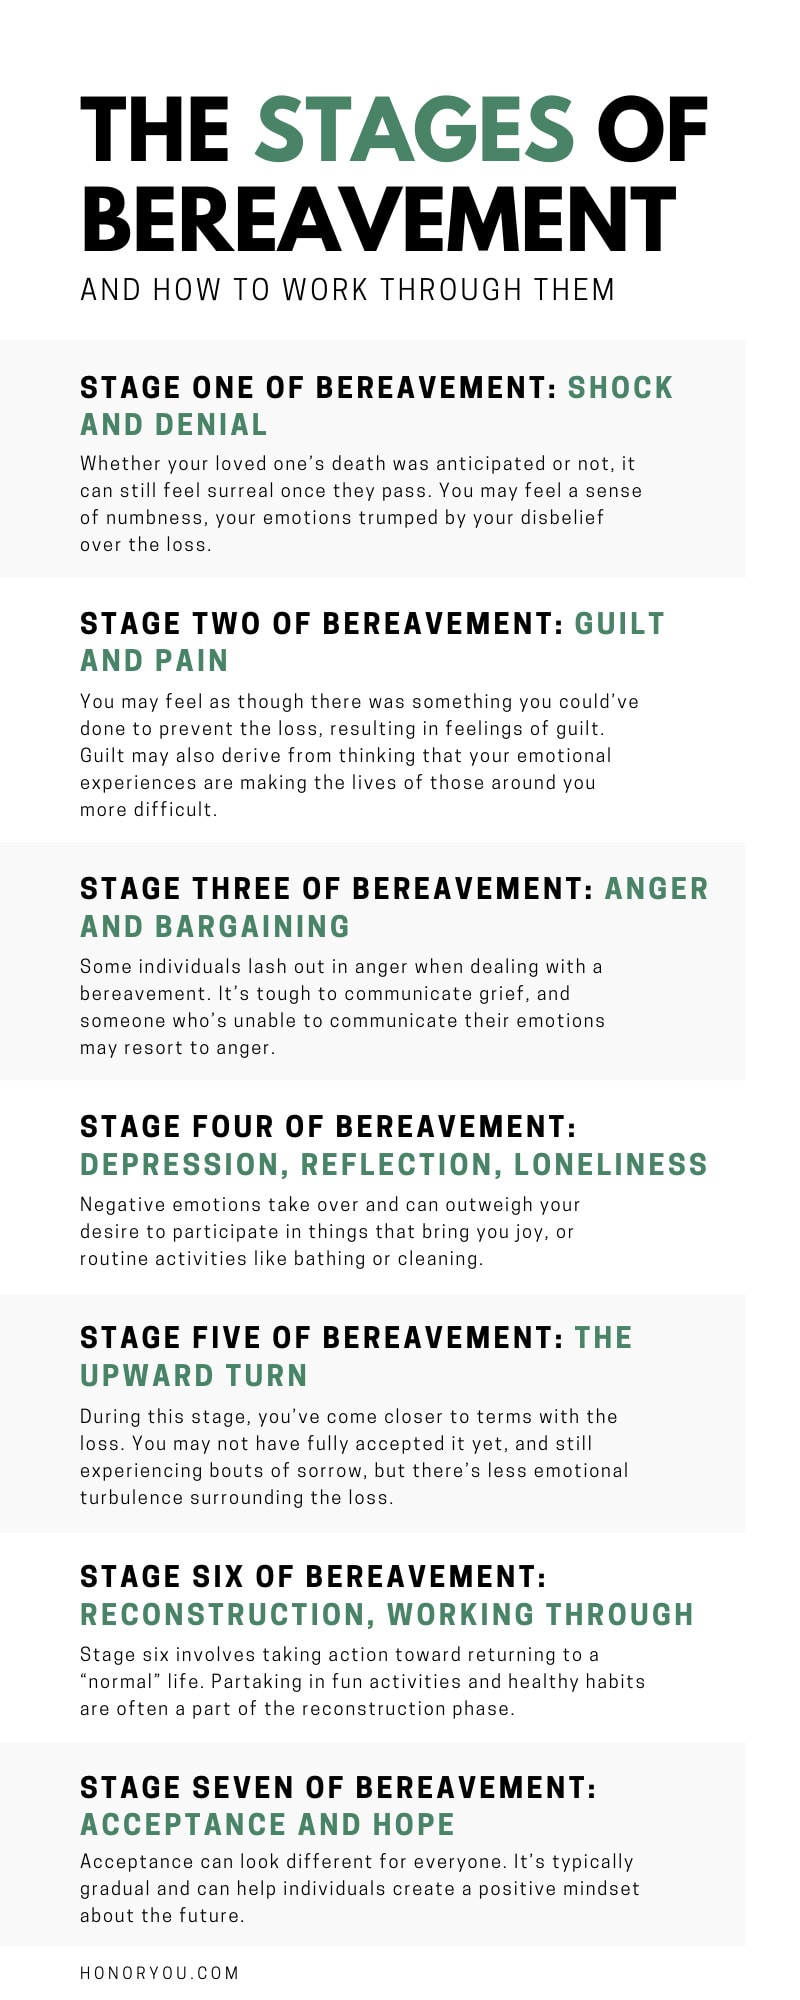 The Stages of Bereavement and How to Work Through Them